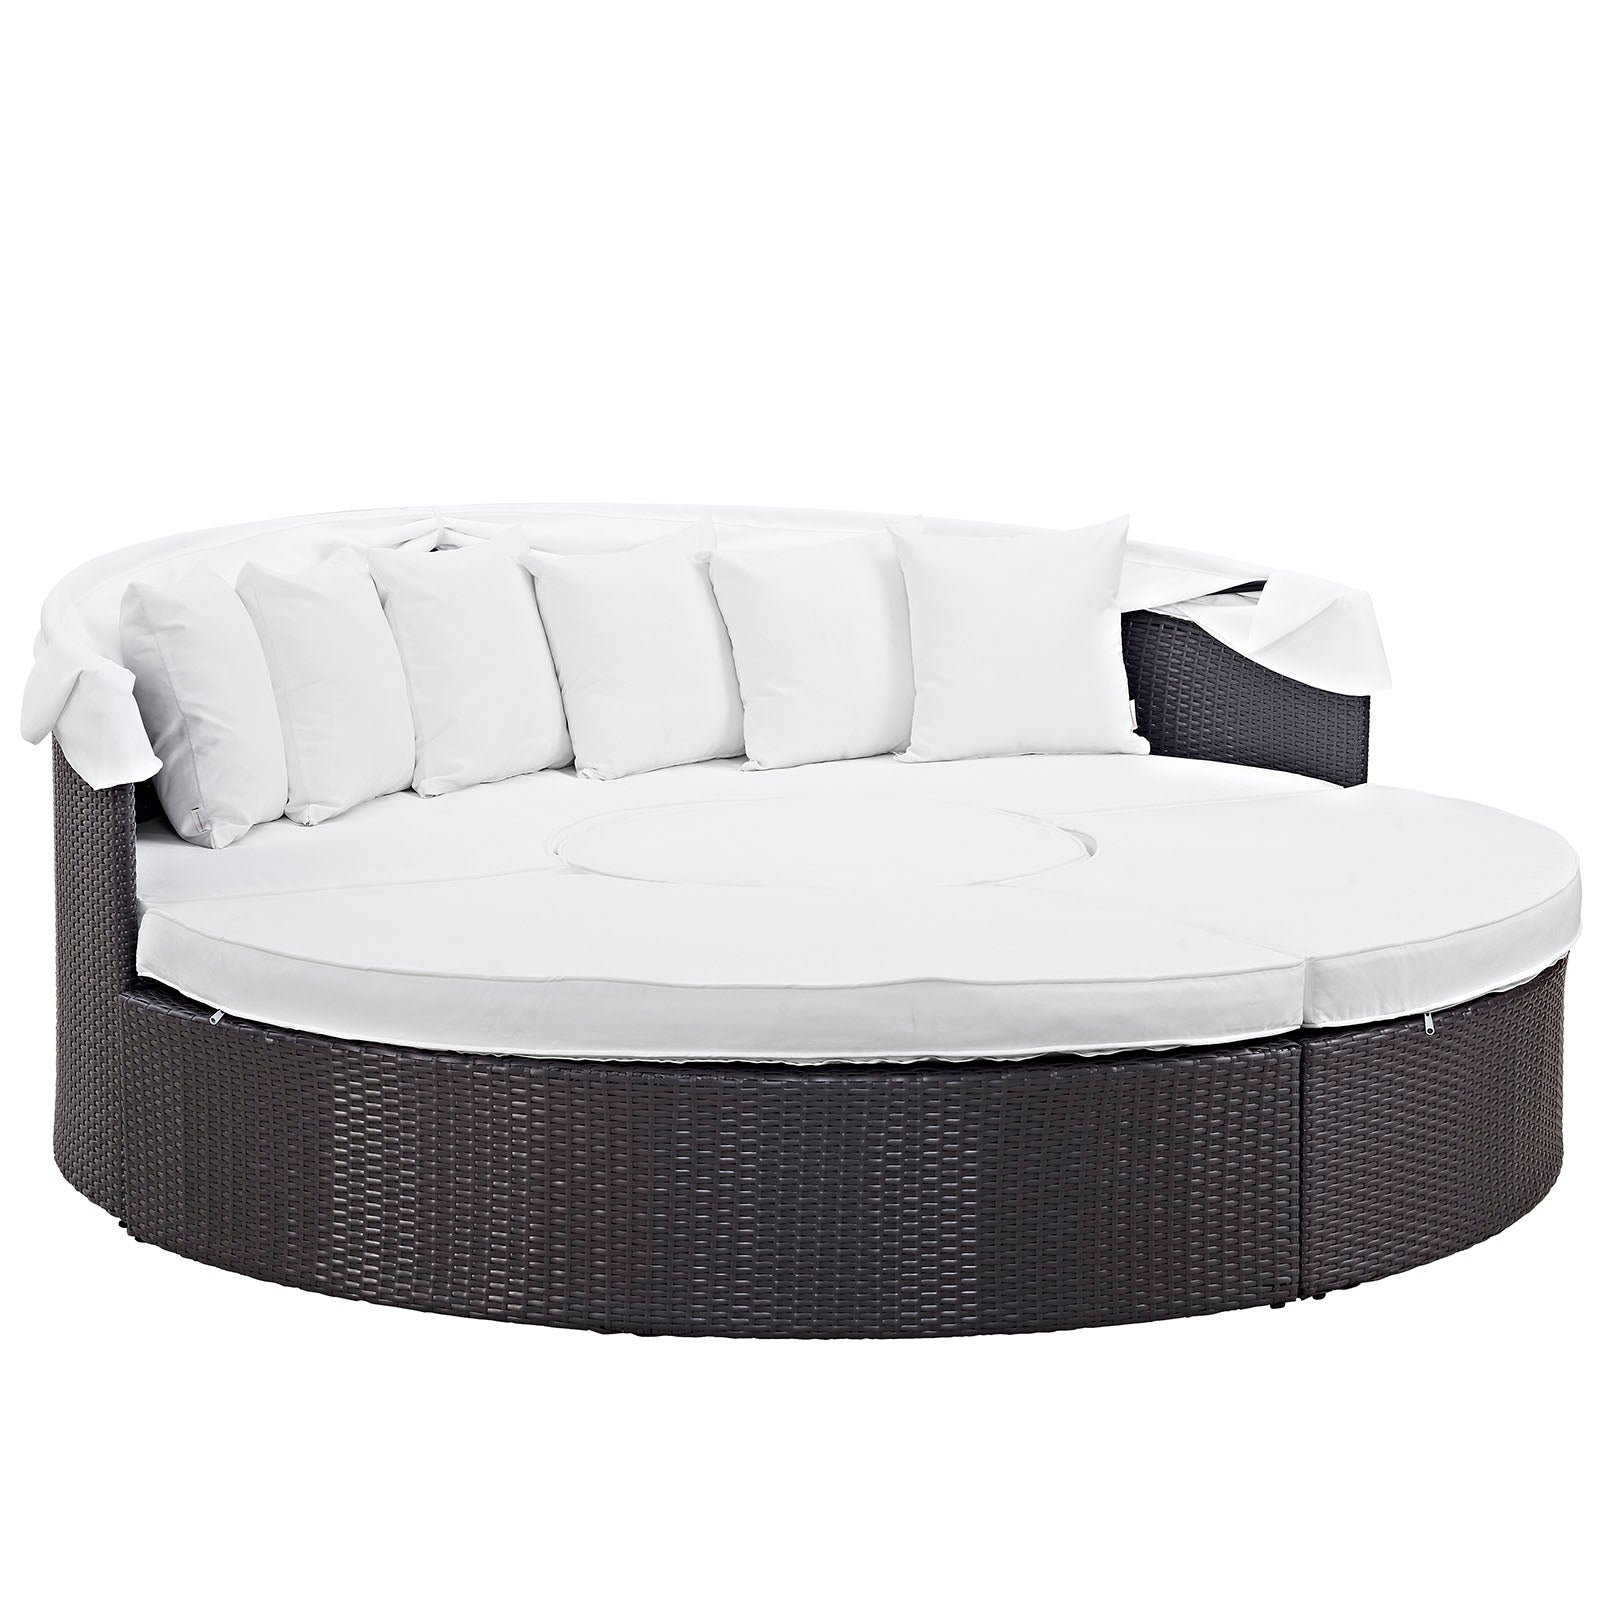 Modway Patio Daybeds - Quest Canopy Outdoor Patio Daybed Espresso White